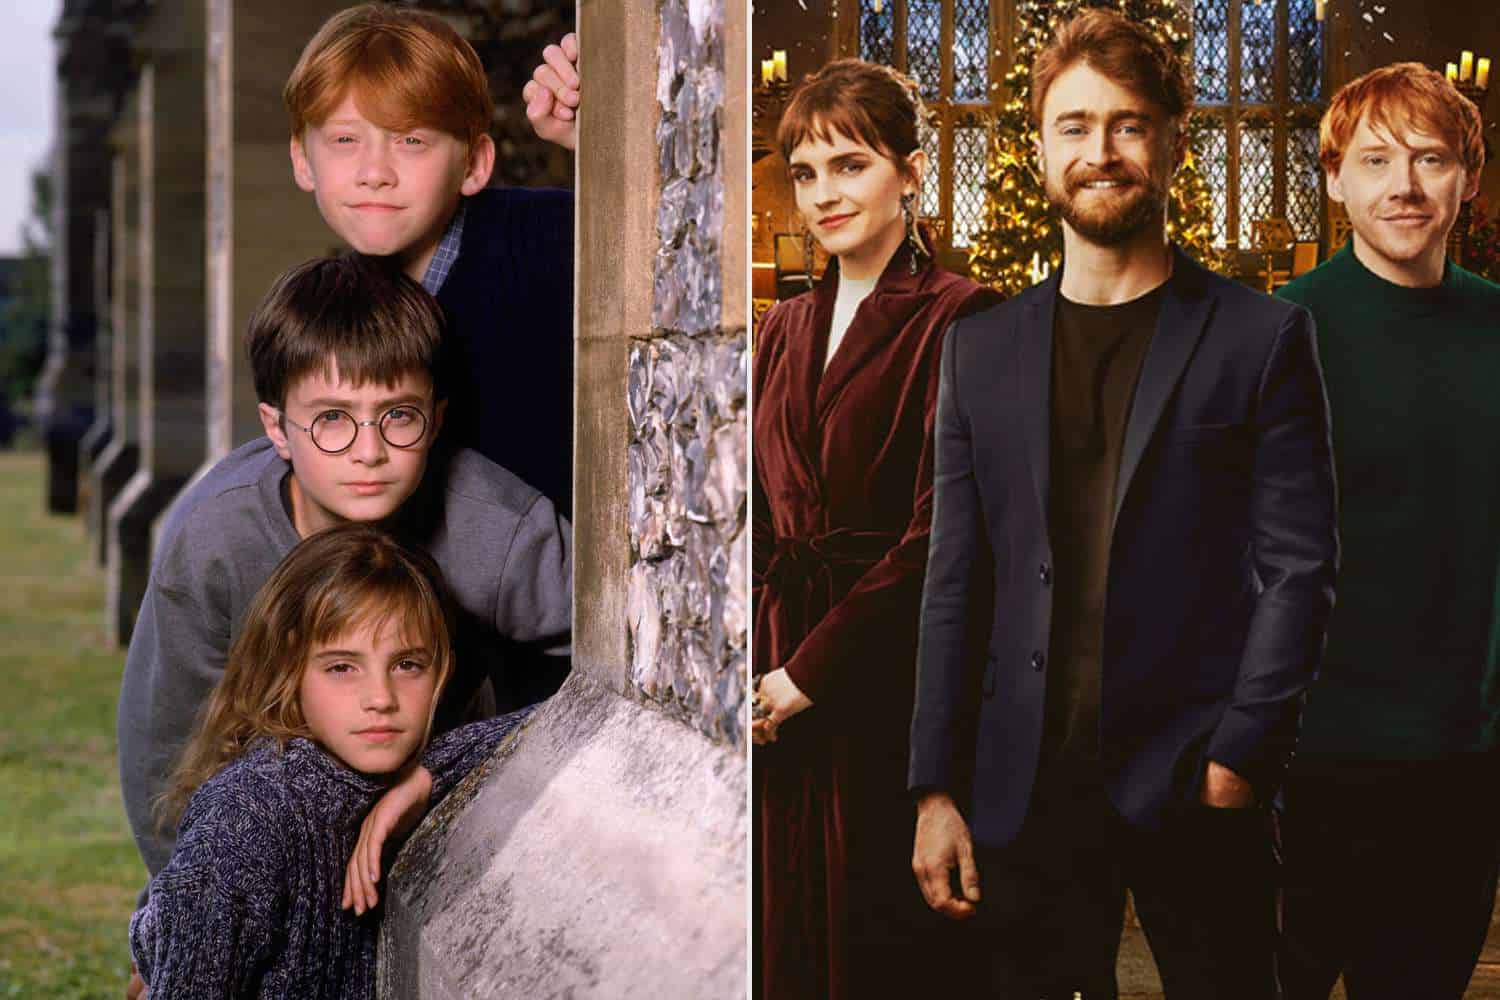 Cast of Harry Potter Then and Now (Credits: People)